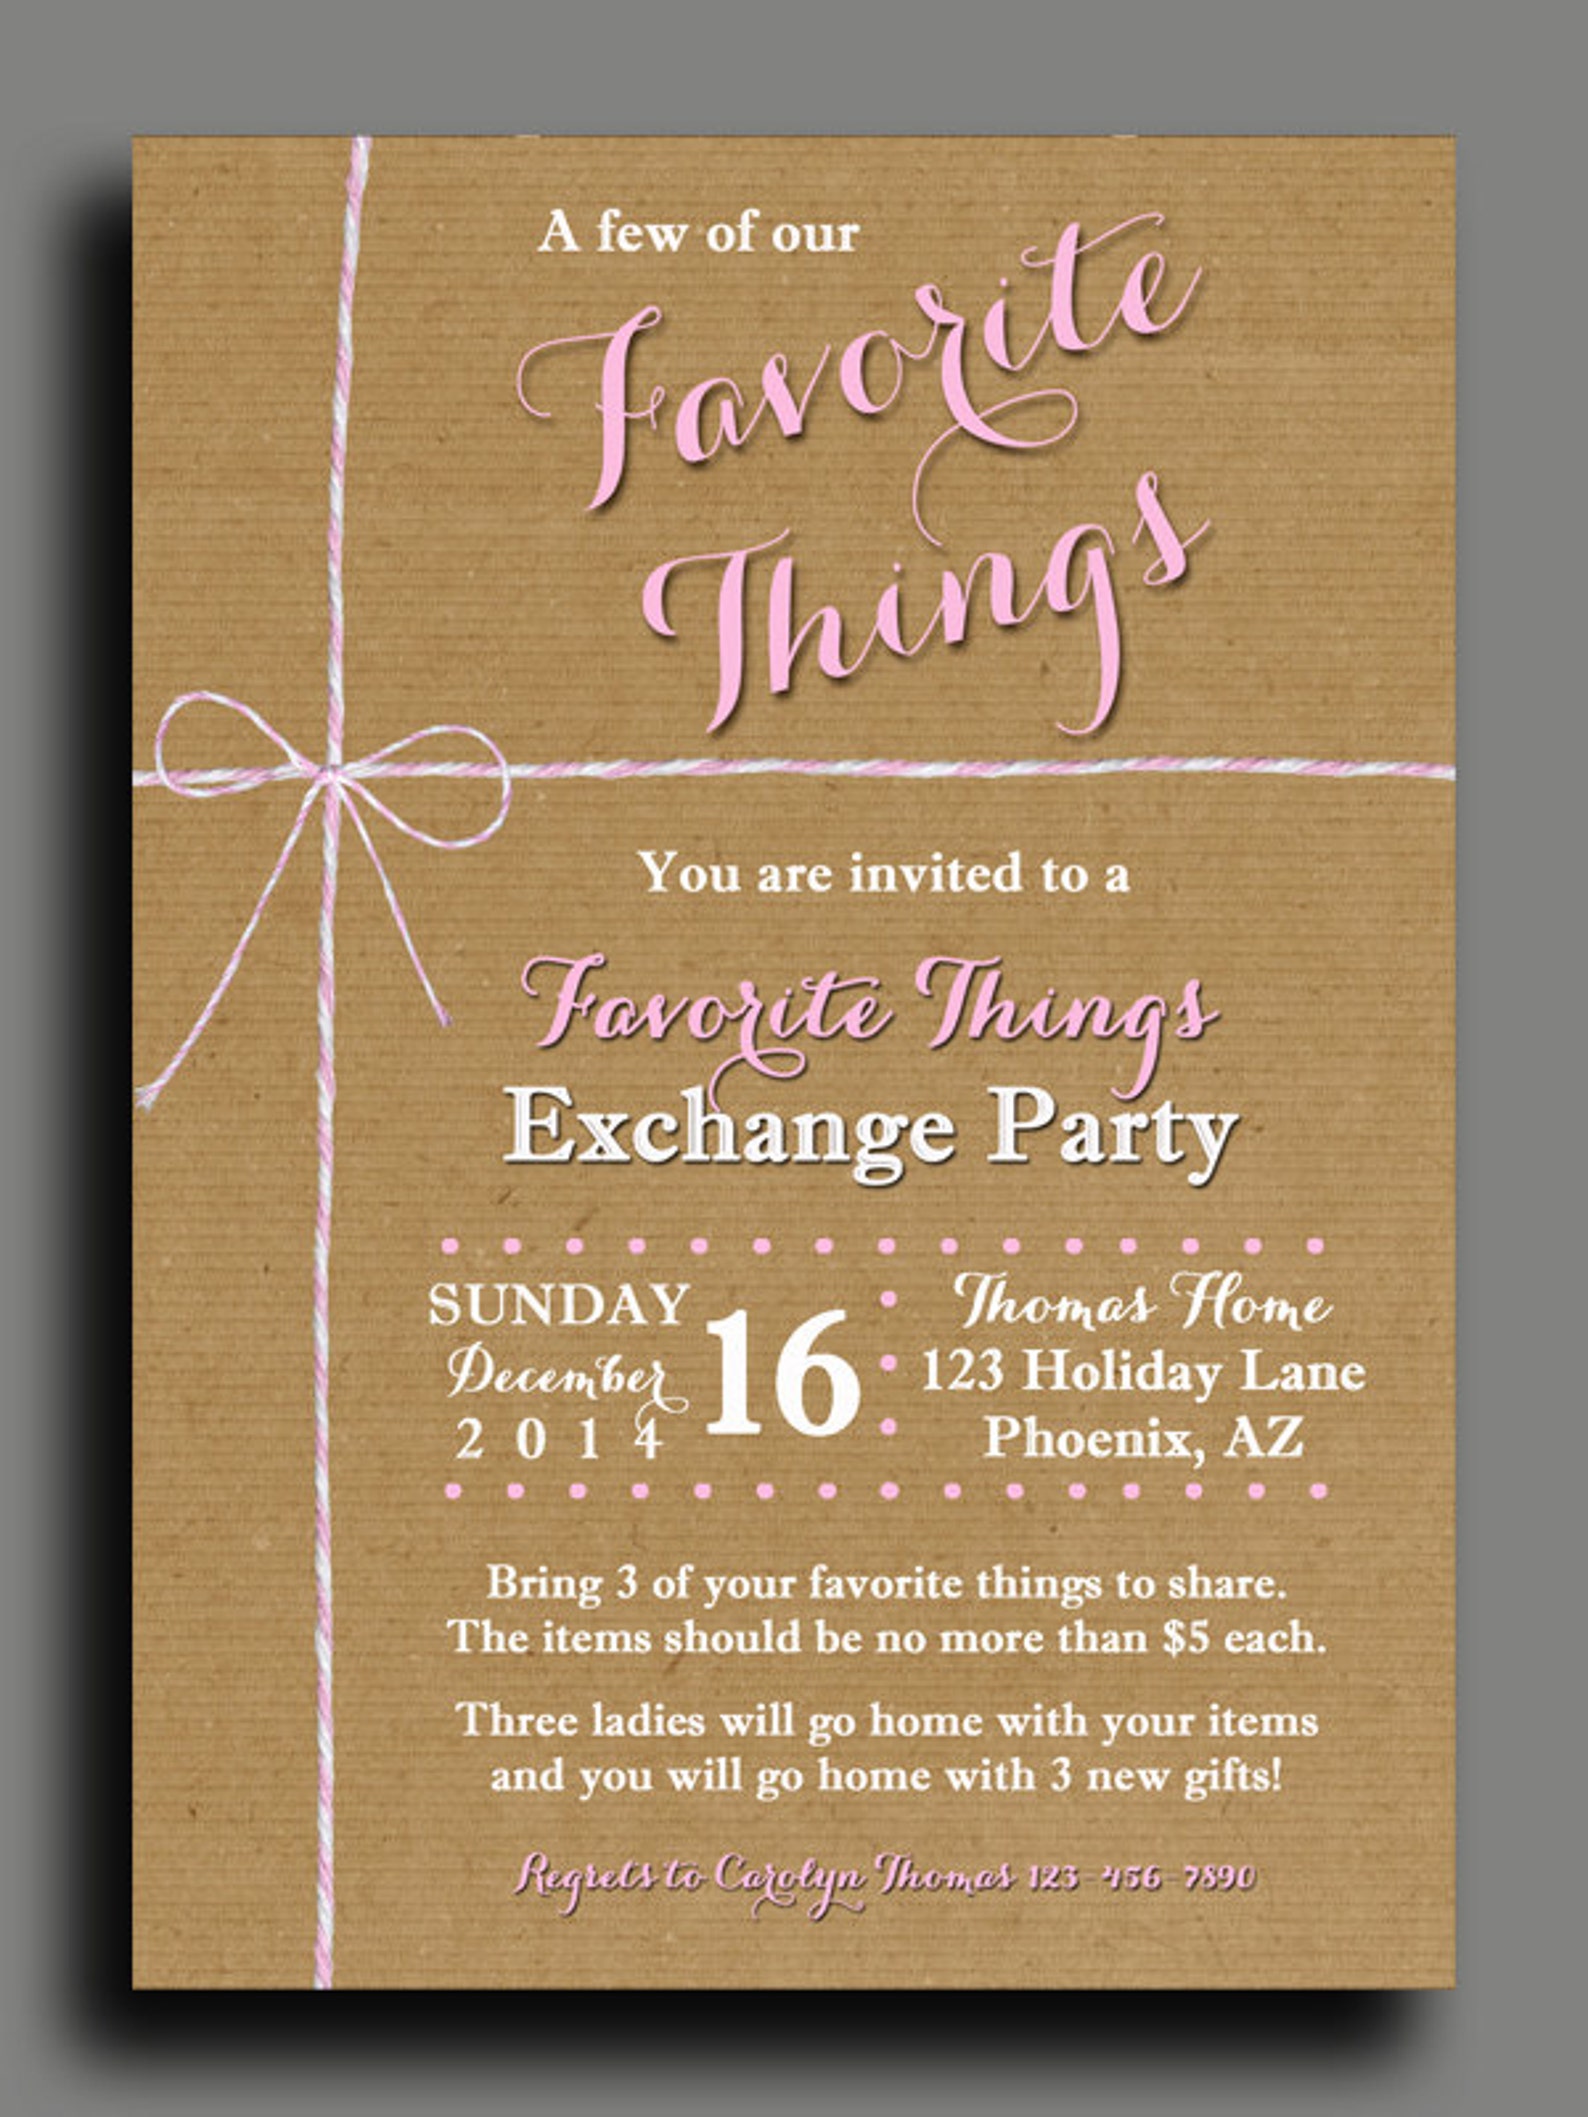 Favorite Things Party Invitation Template Free